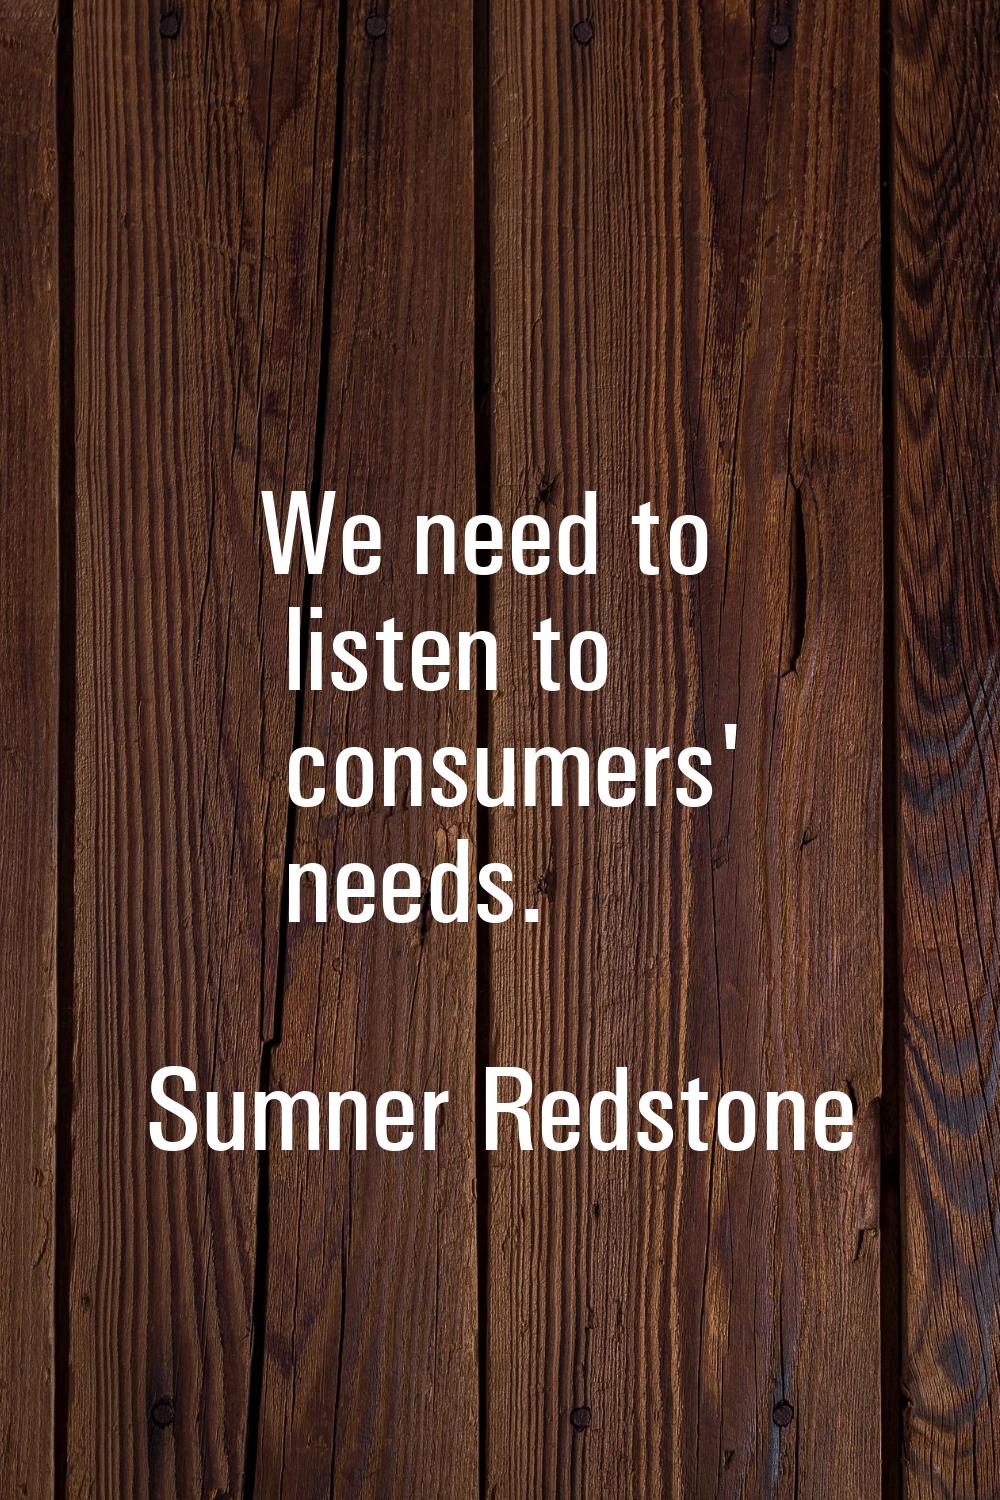 We need to listen to consumers' needs.